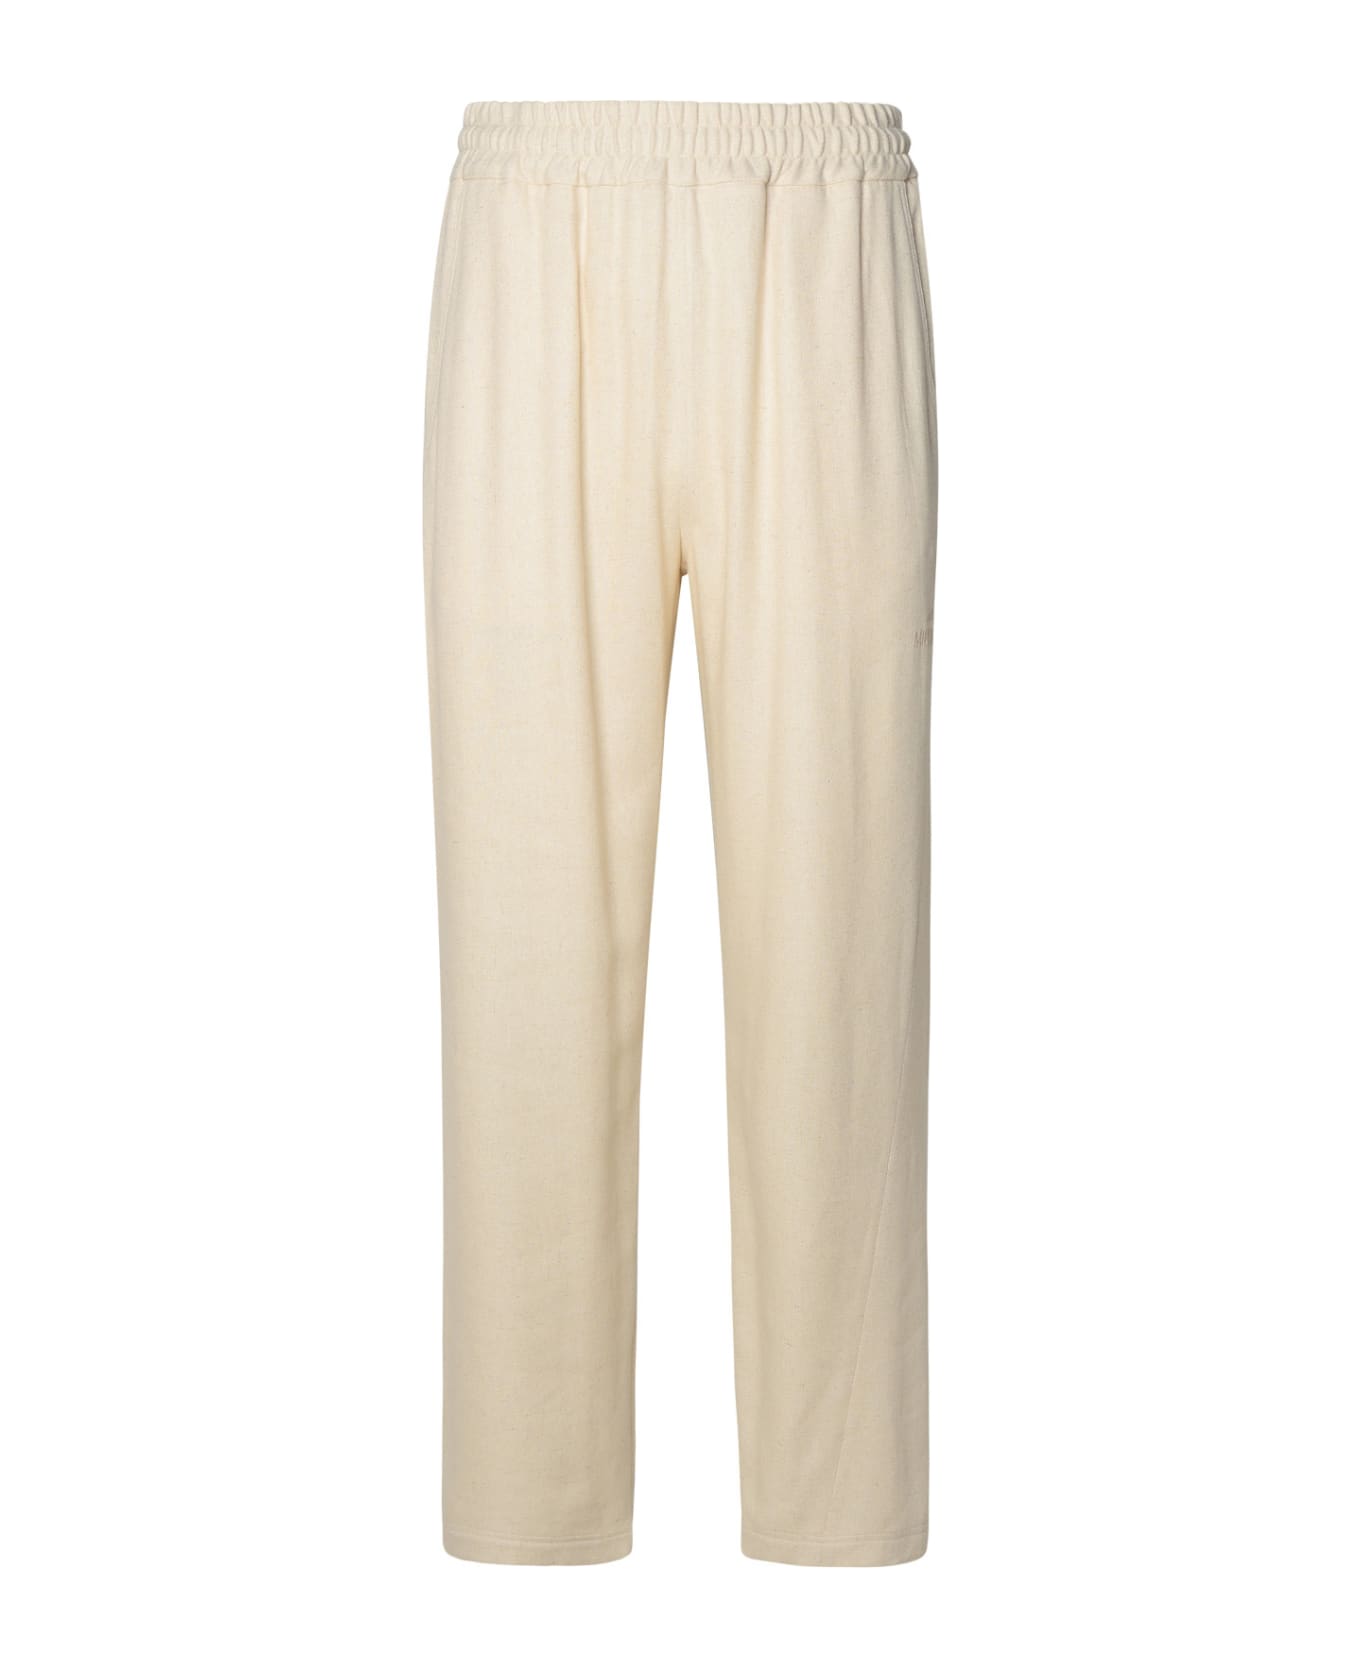 GCDS Ivory Linen Blend Trousers - WHITE ボトムス